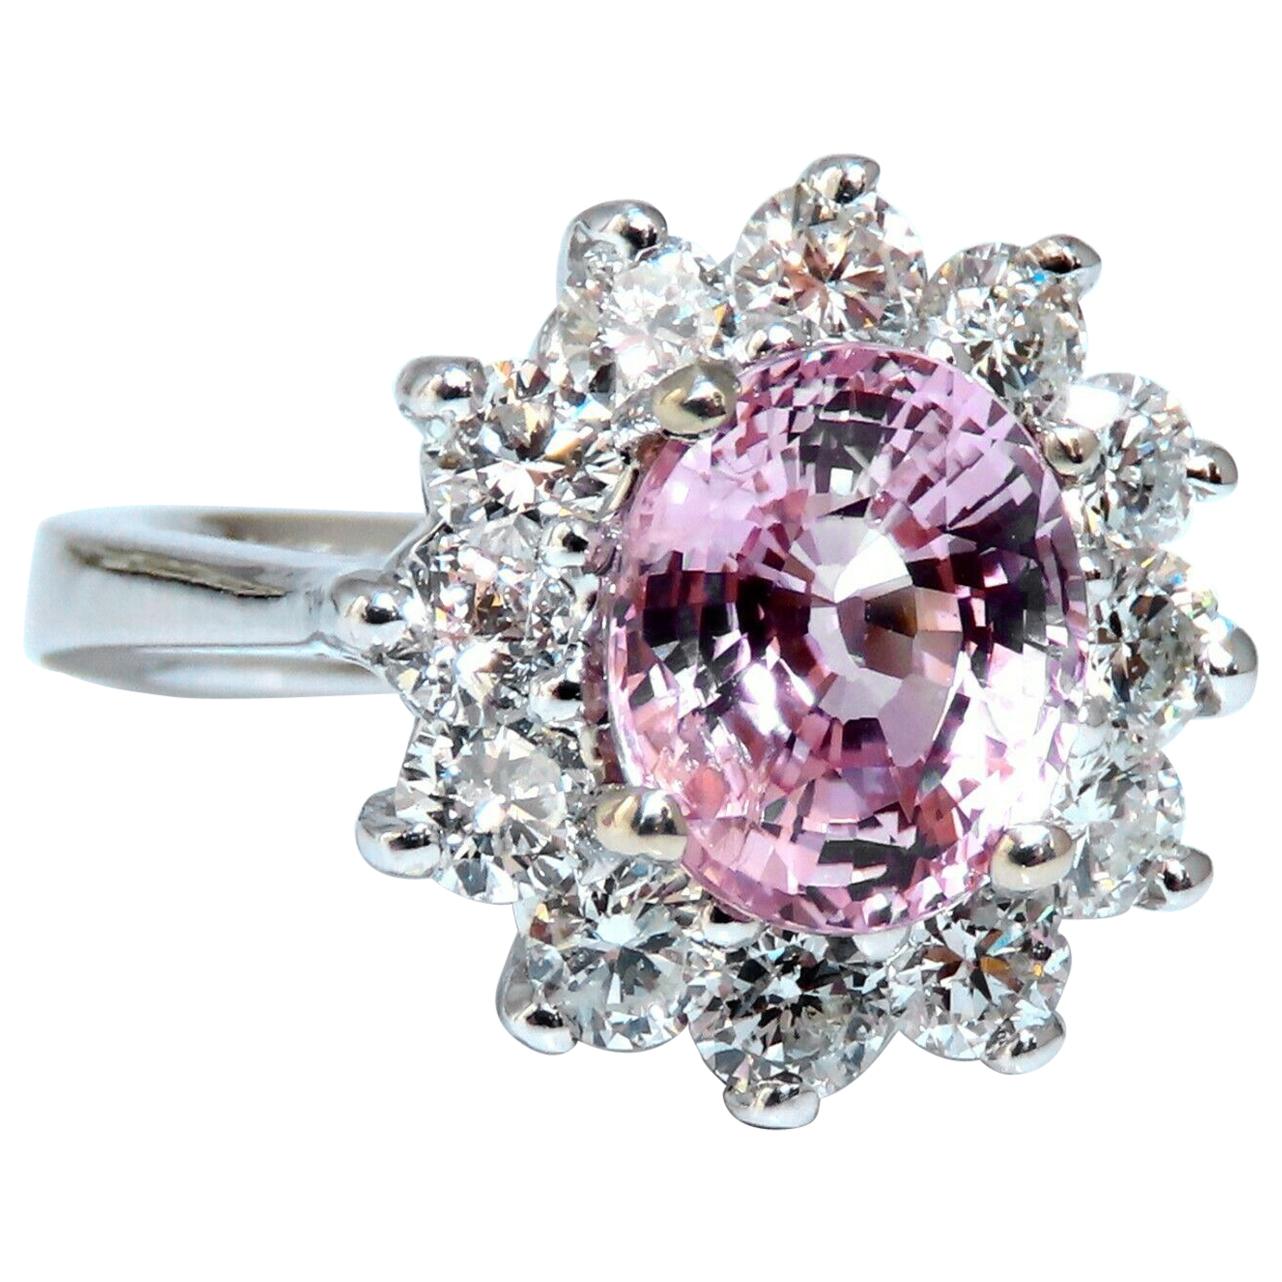 GIA Certified 3.58 Carat Natural Padparadscha Pink Sapphire Diamond Ring Fine For Sale